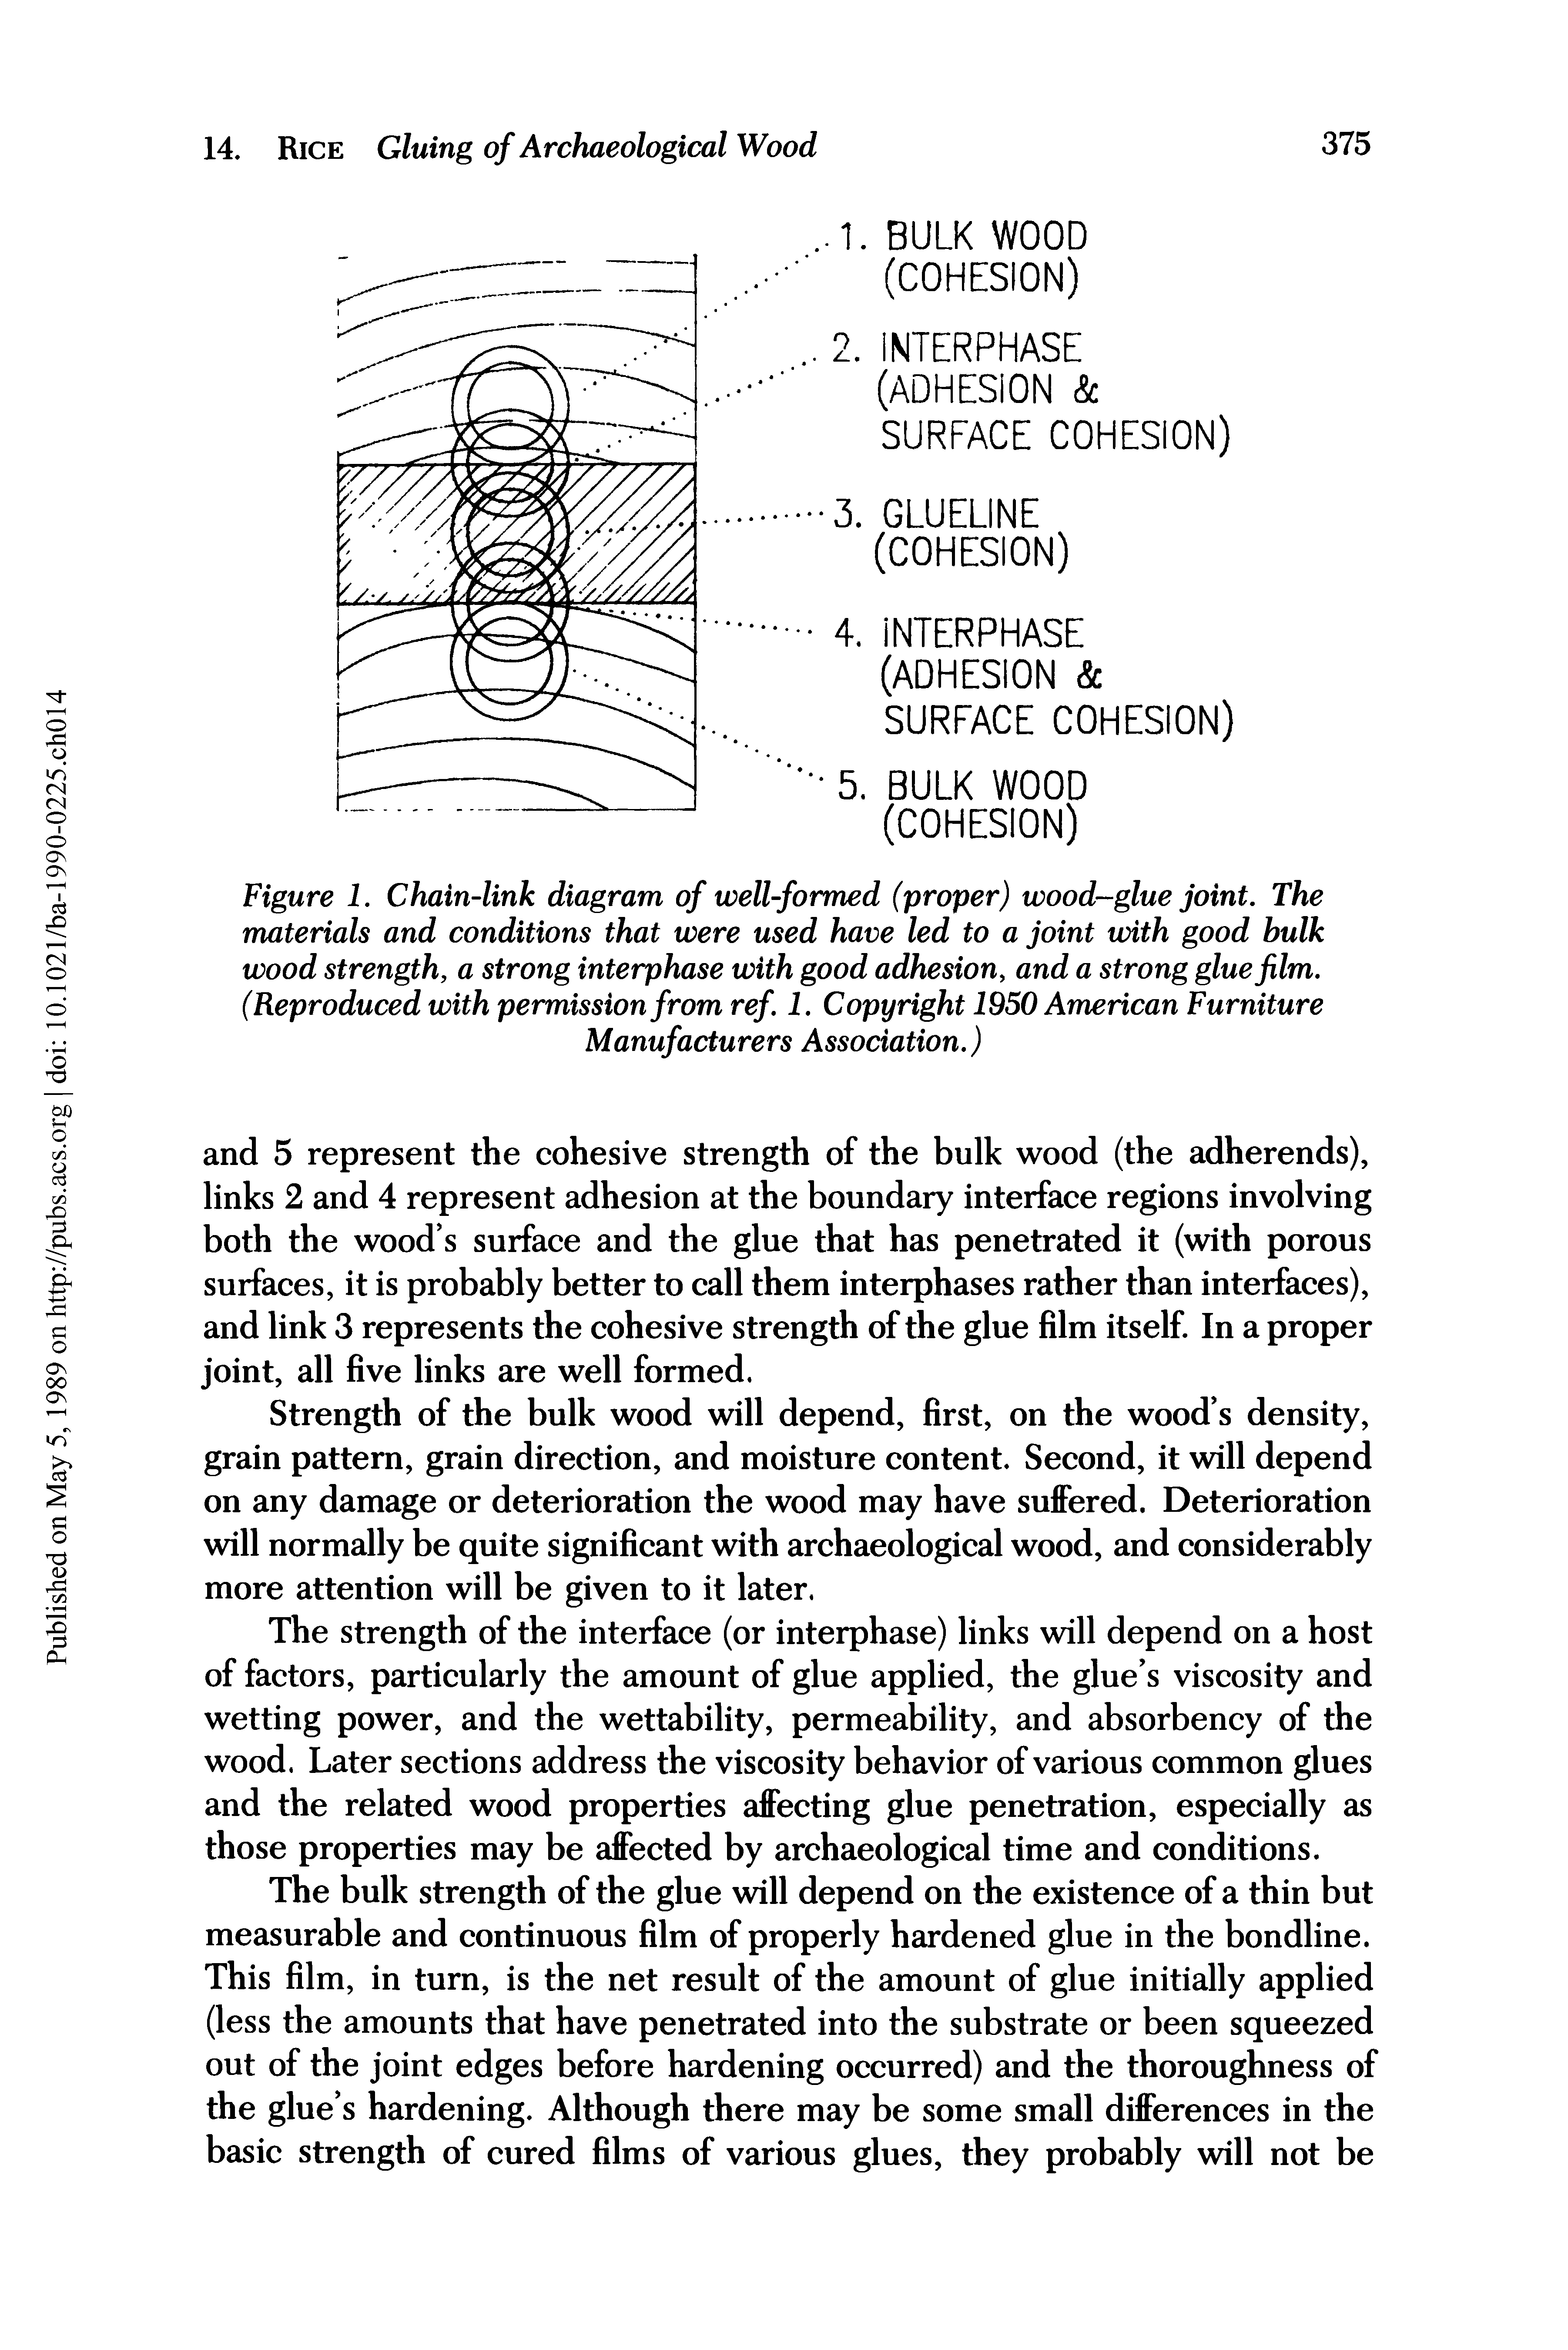 Figure 1. Chain-link diagram of well-formed (proper) wood-glue joint. The materials and conditions that were used have led to a joint with good bulk wood strength, a strong interphase with good adhesion, and a strong glue film. (Reproduced with permission from ref. 1. Copyright 1950 American Furniture Manufacturers Association.)...